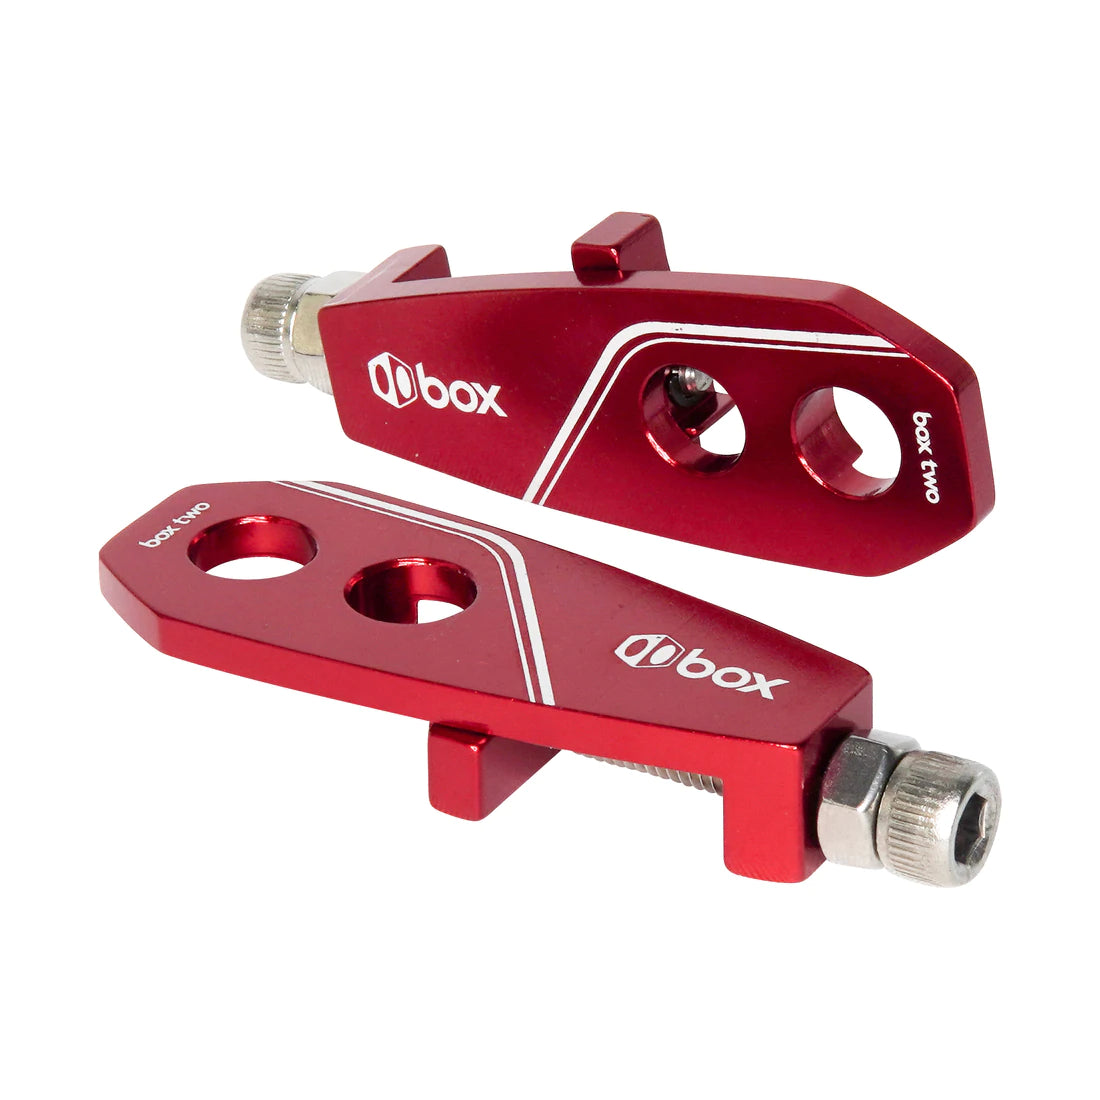 Box Two 3/8" BMX Chain Tensioners - Pair - Red